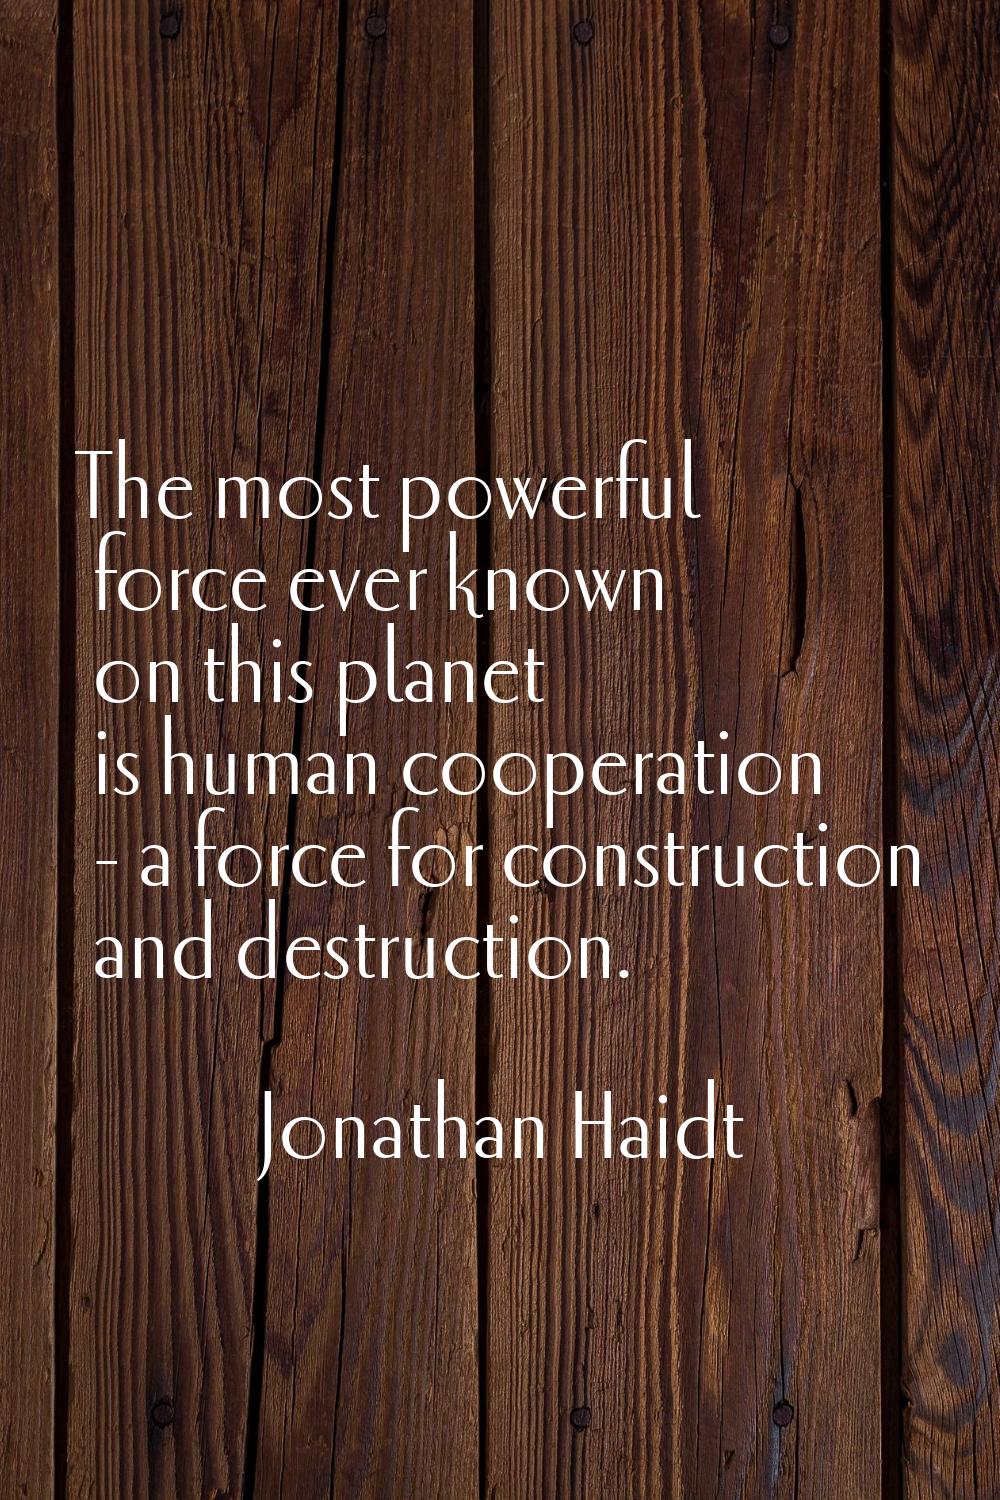 The most powerful force ever known on this planet is human cooperation - a force for construction a